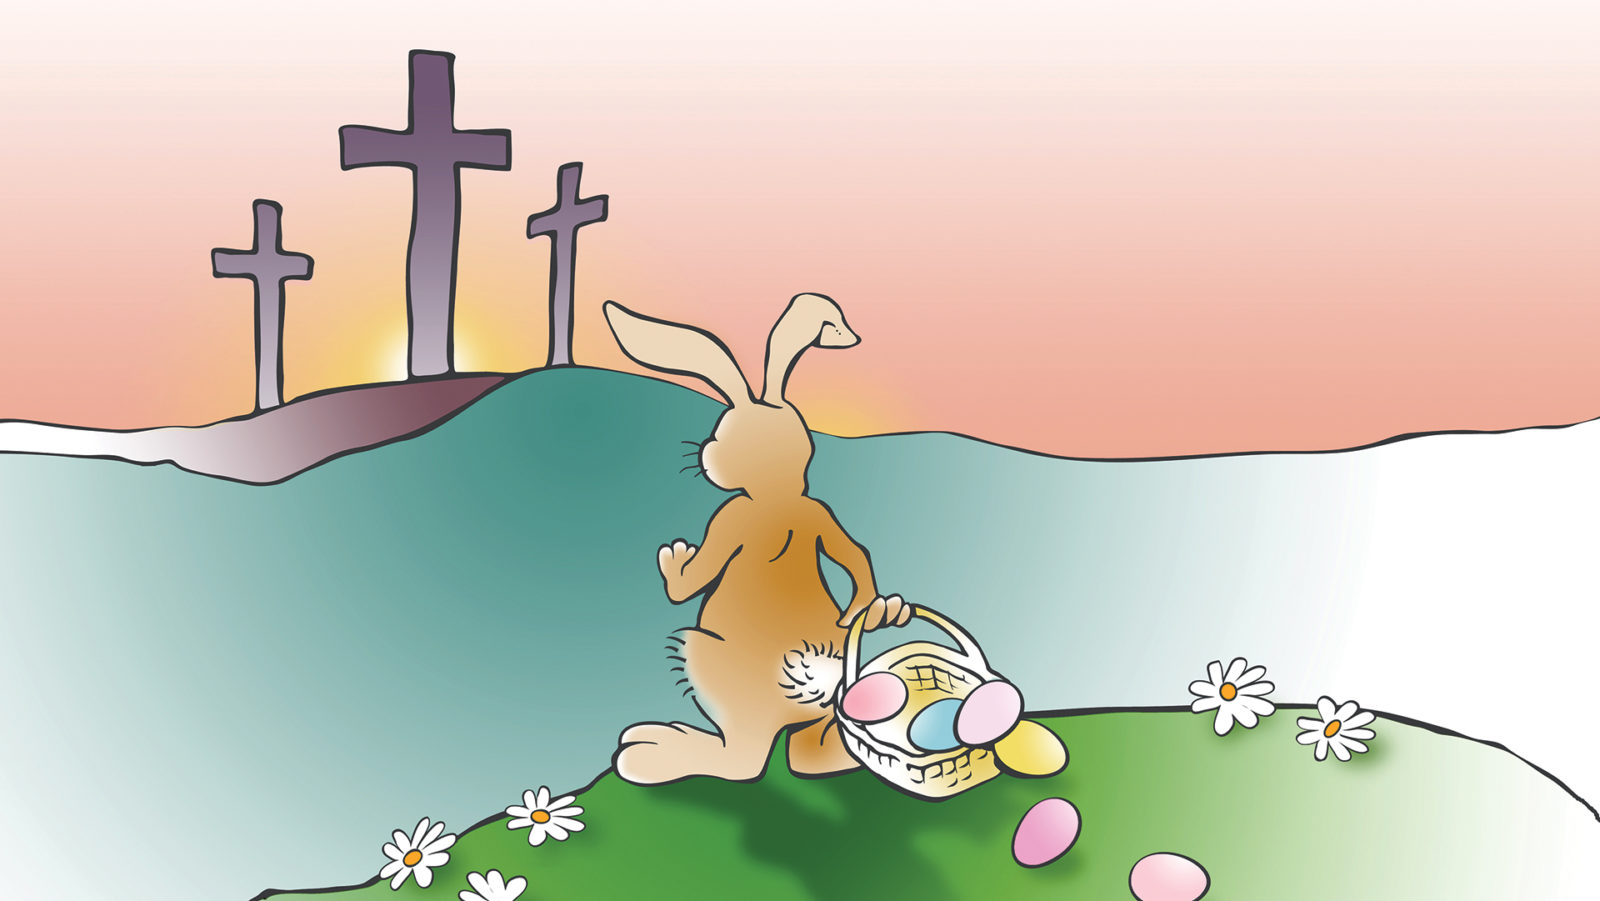 Why do seventh-day adventists not celebrate easter?